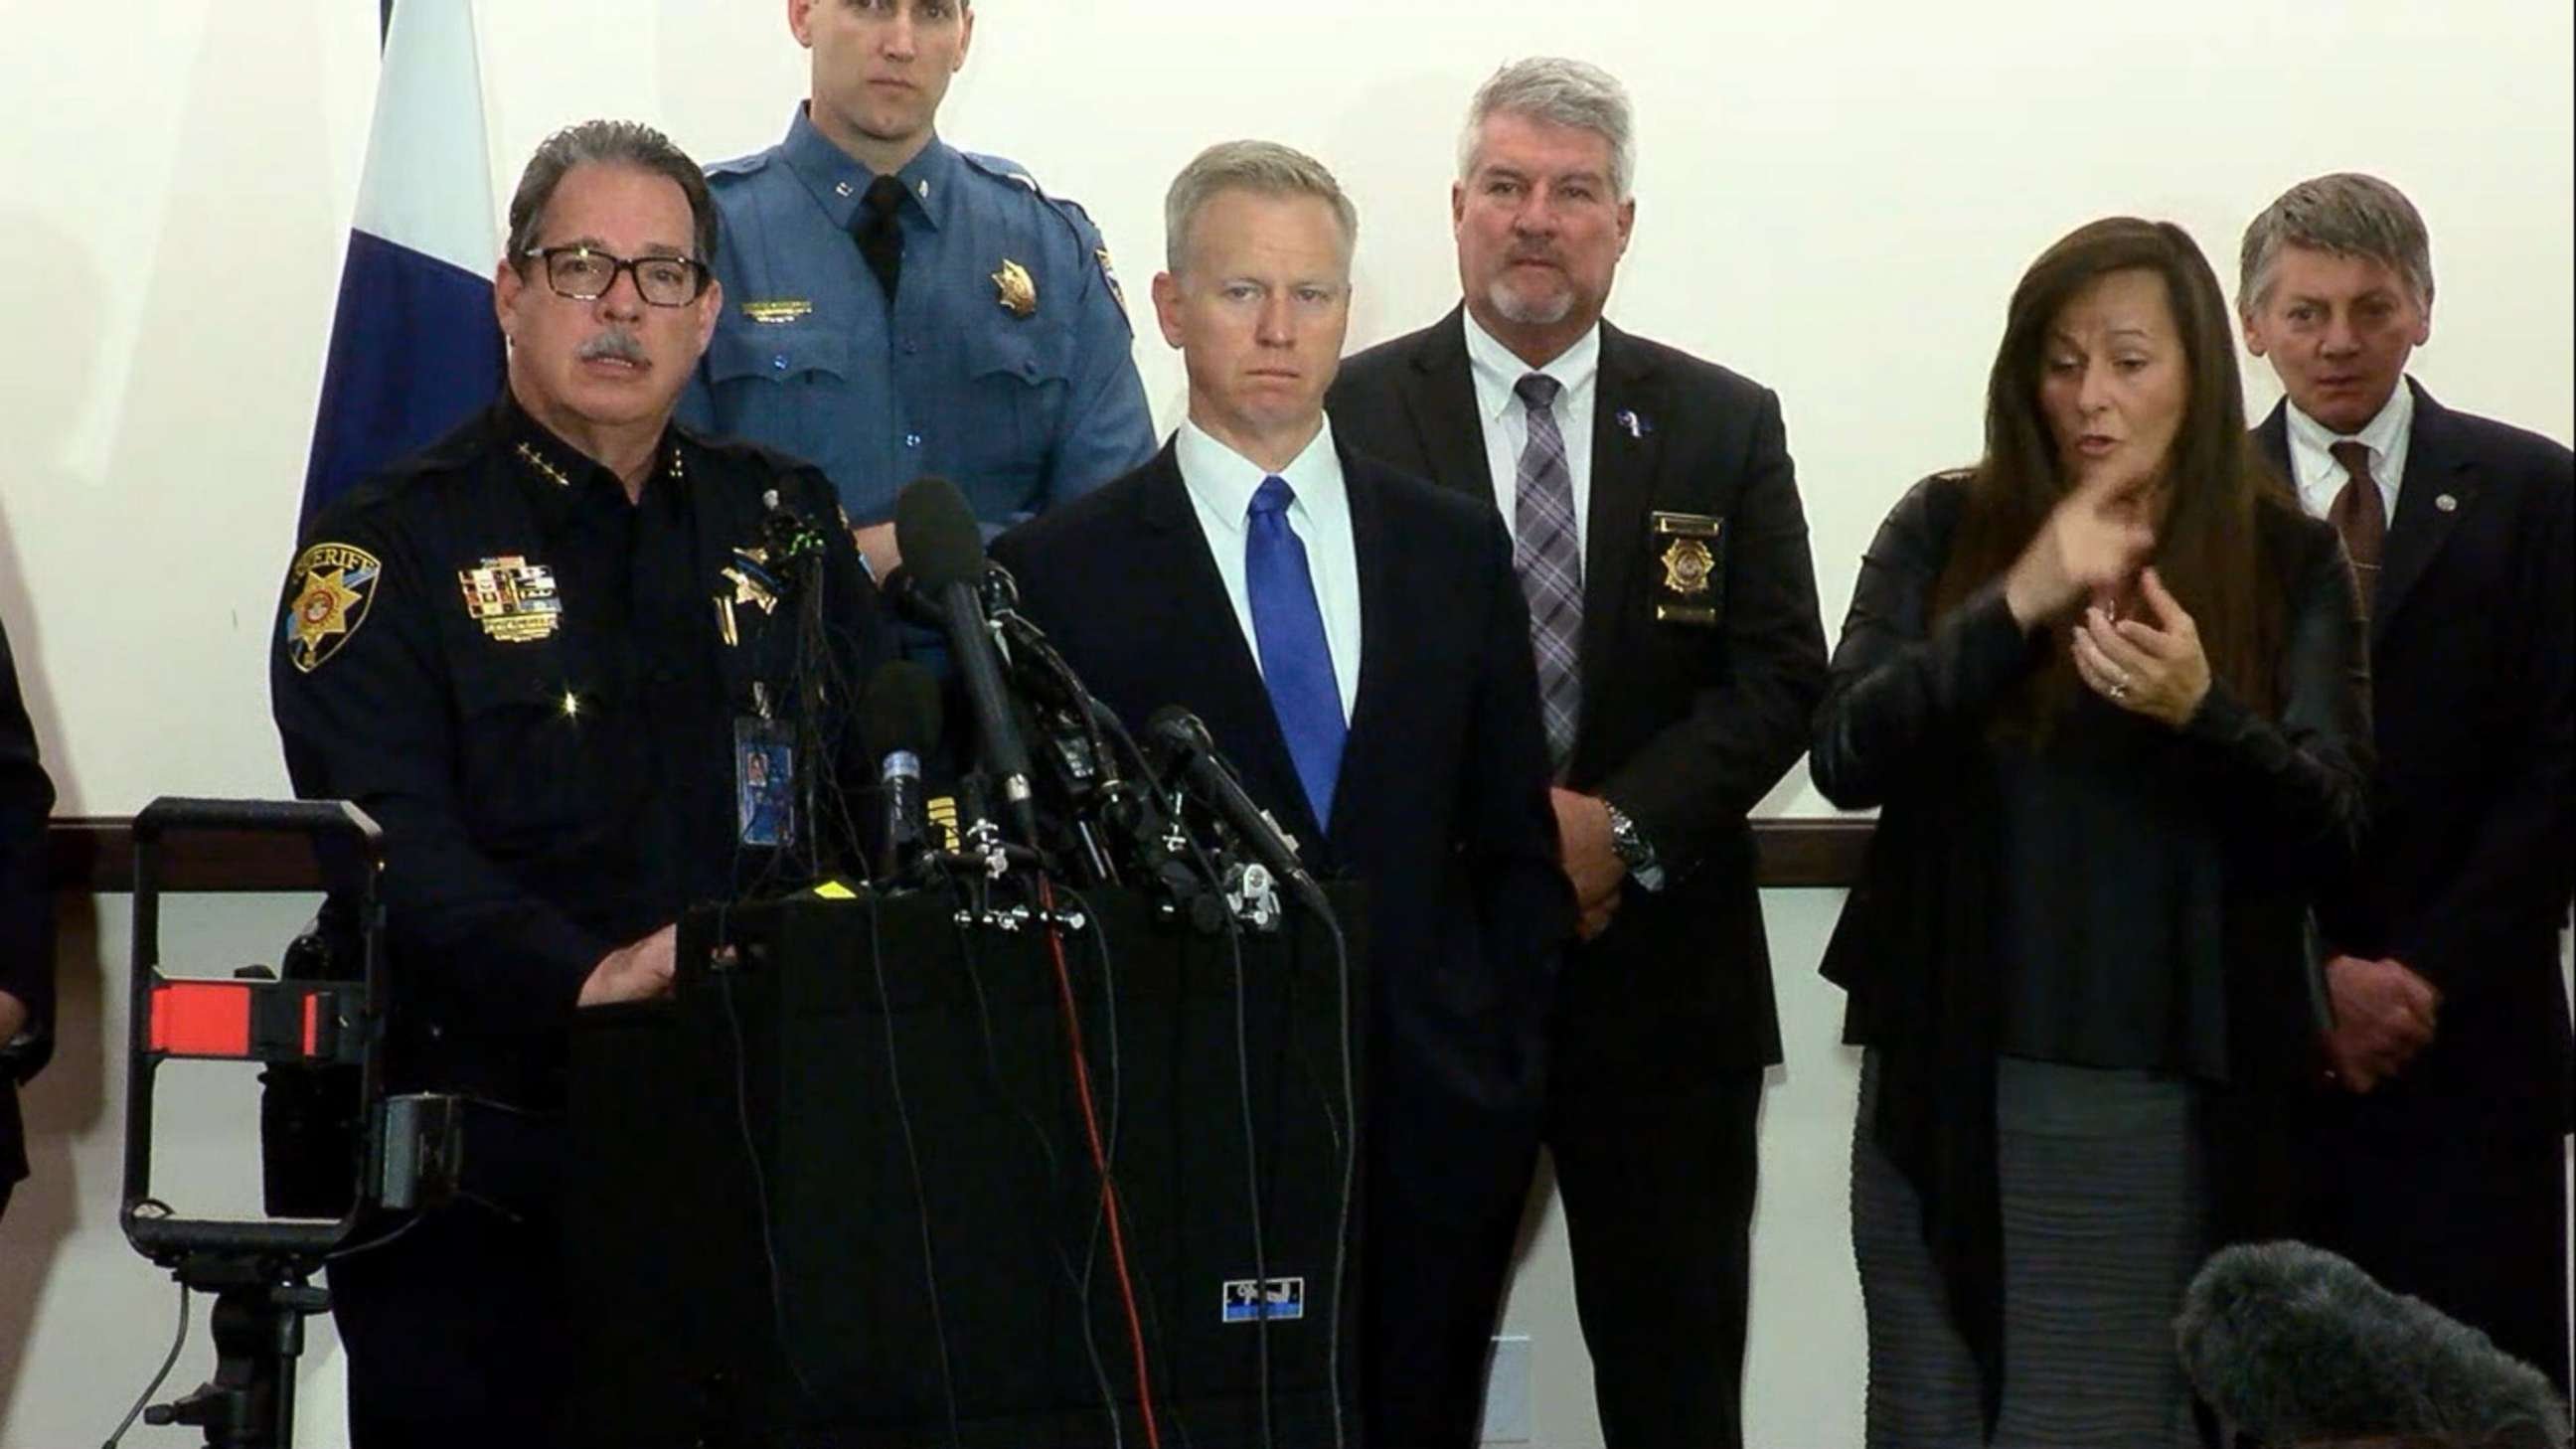 PHOTO: Sheriff Tony Spurlock speaks at a press conference, May 8, 2019, regarding a shooting at the STEM School Highlands Ranch the previous day in Highlands Ranch, Colo.